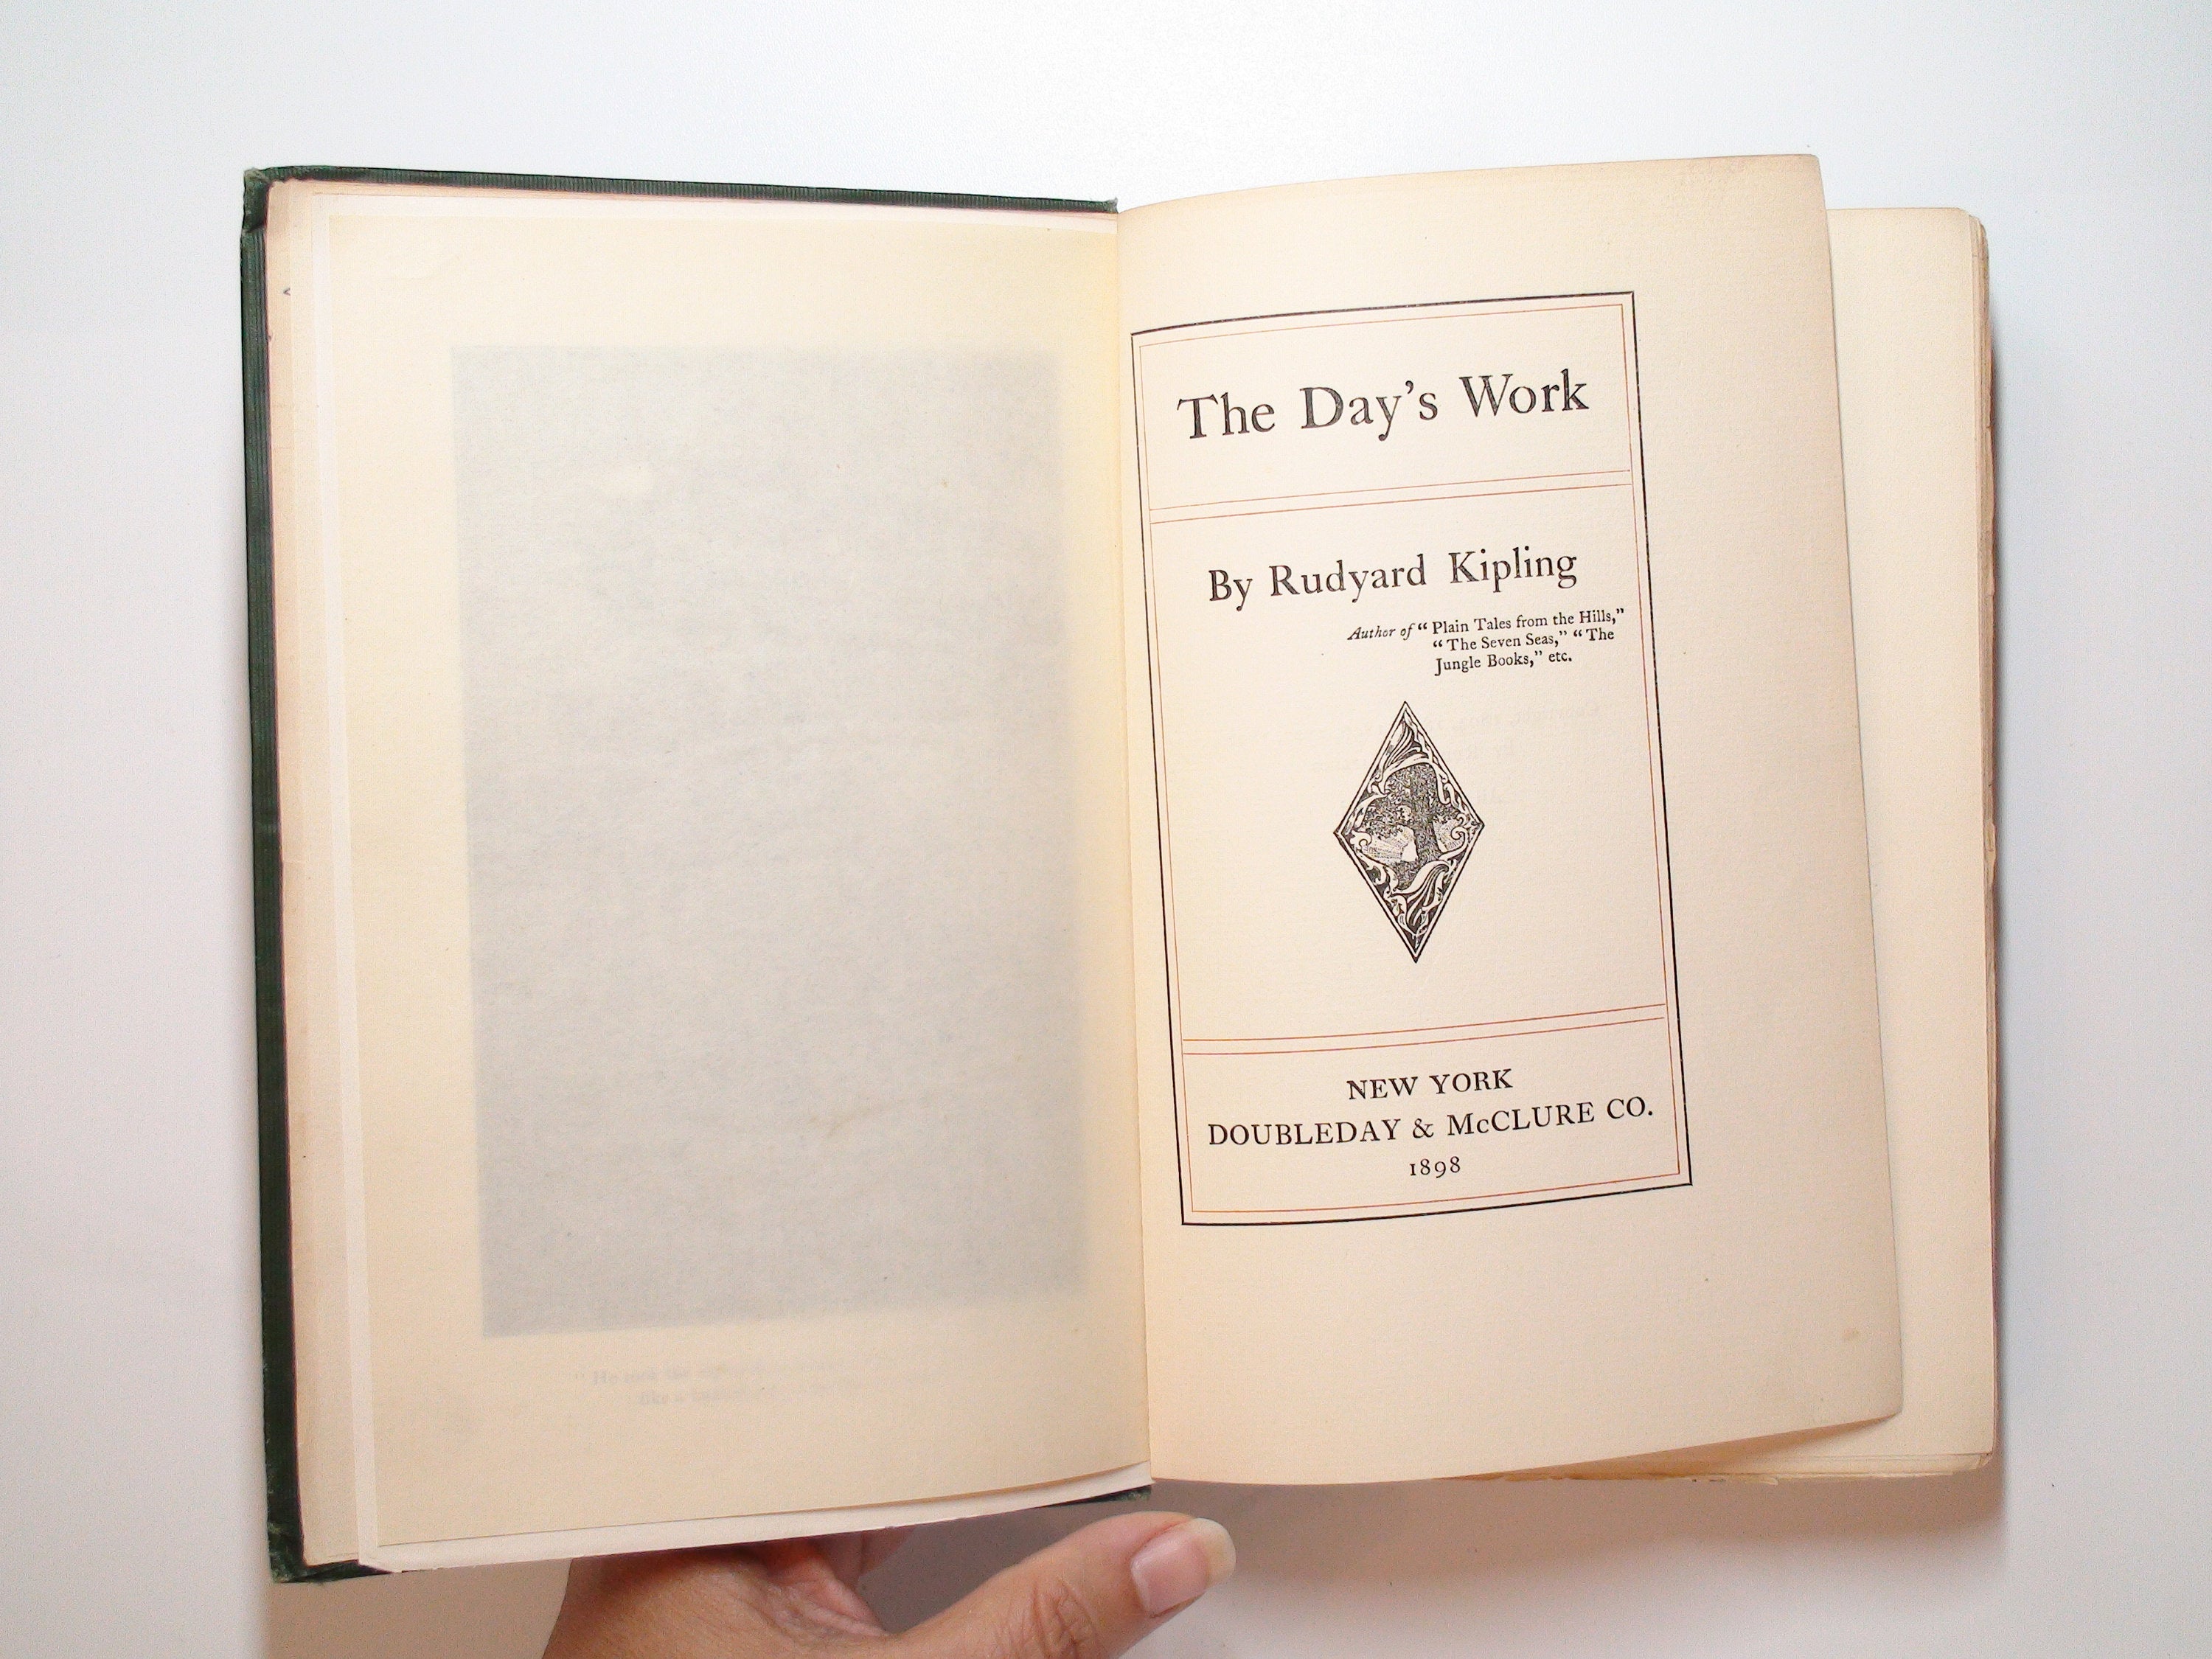 The Day's Work, Rudyard Kipling, Illustrated, Doubleday & McClure, 1st Ed, 1898